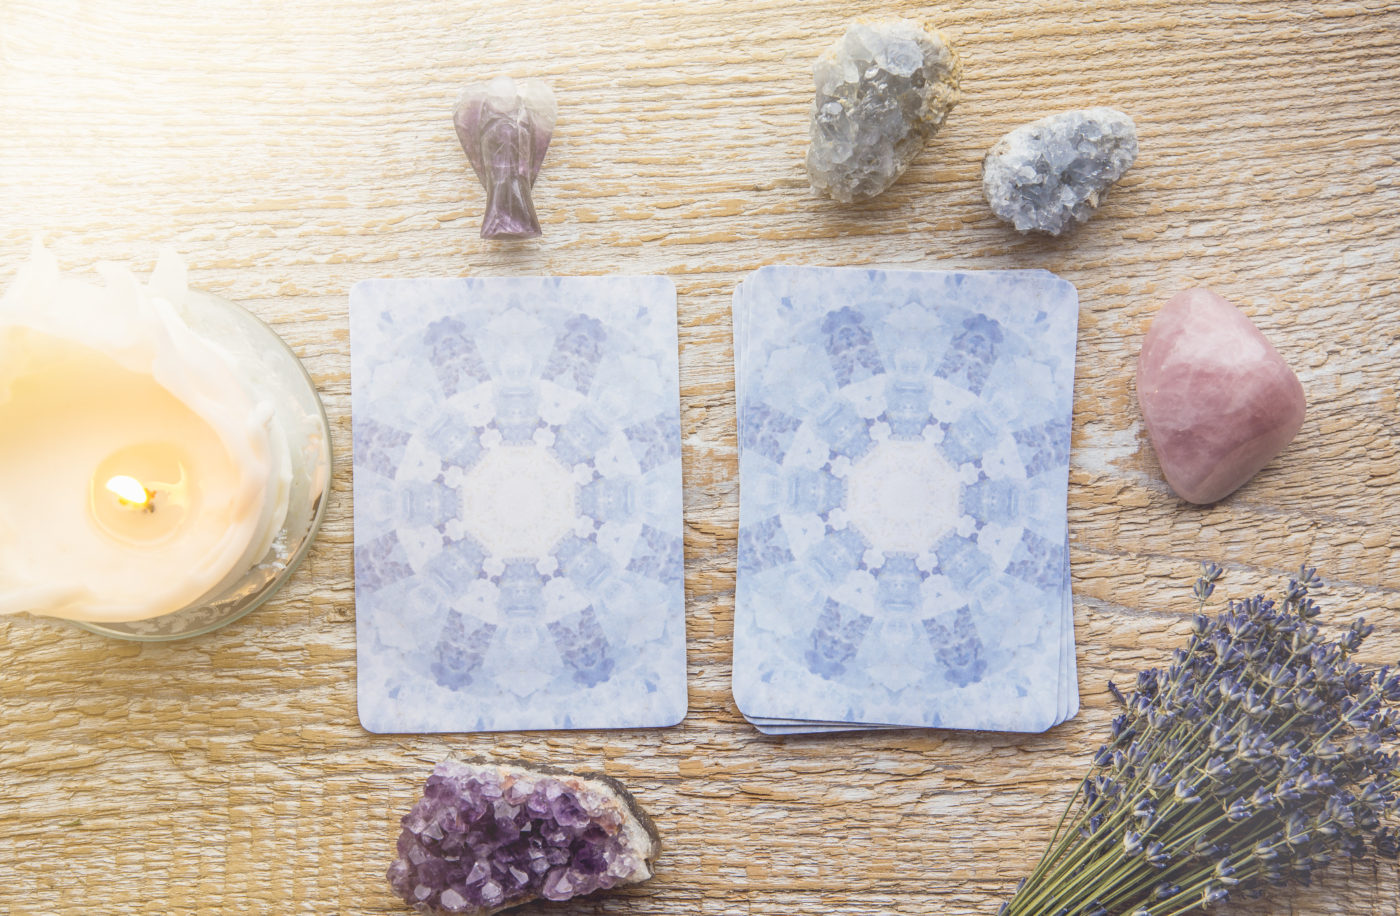 Two powder blue oracle cards are laid flat on a table next to a candle and some crystals and herbs.